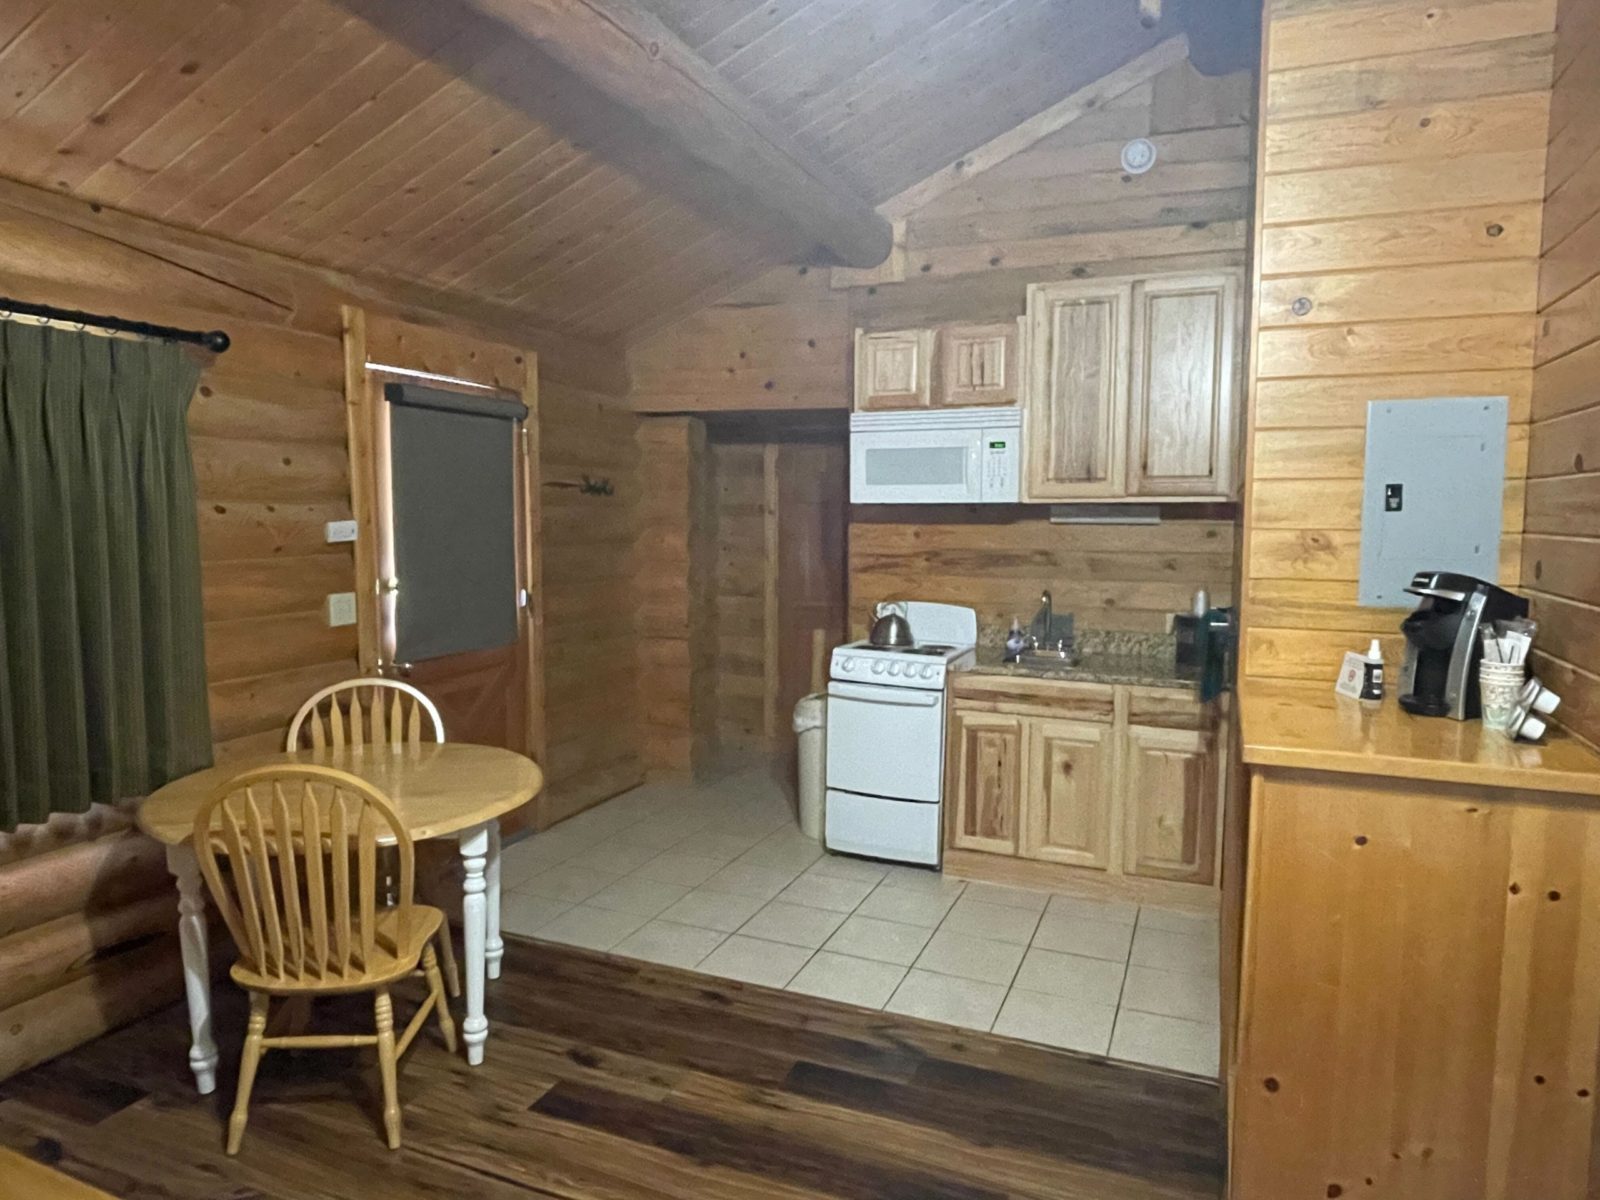 Kitchenette of the deluxe log cabins